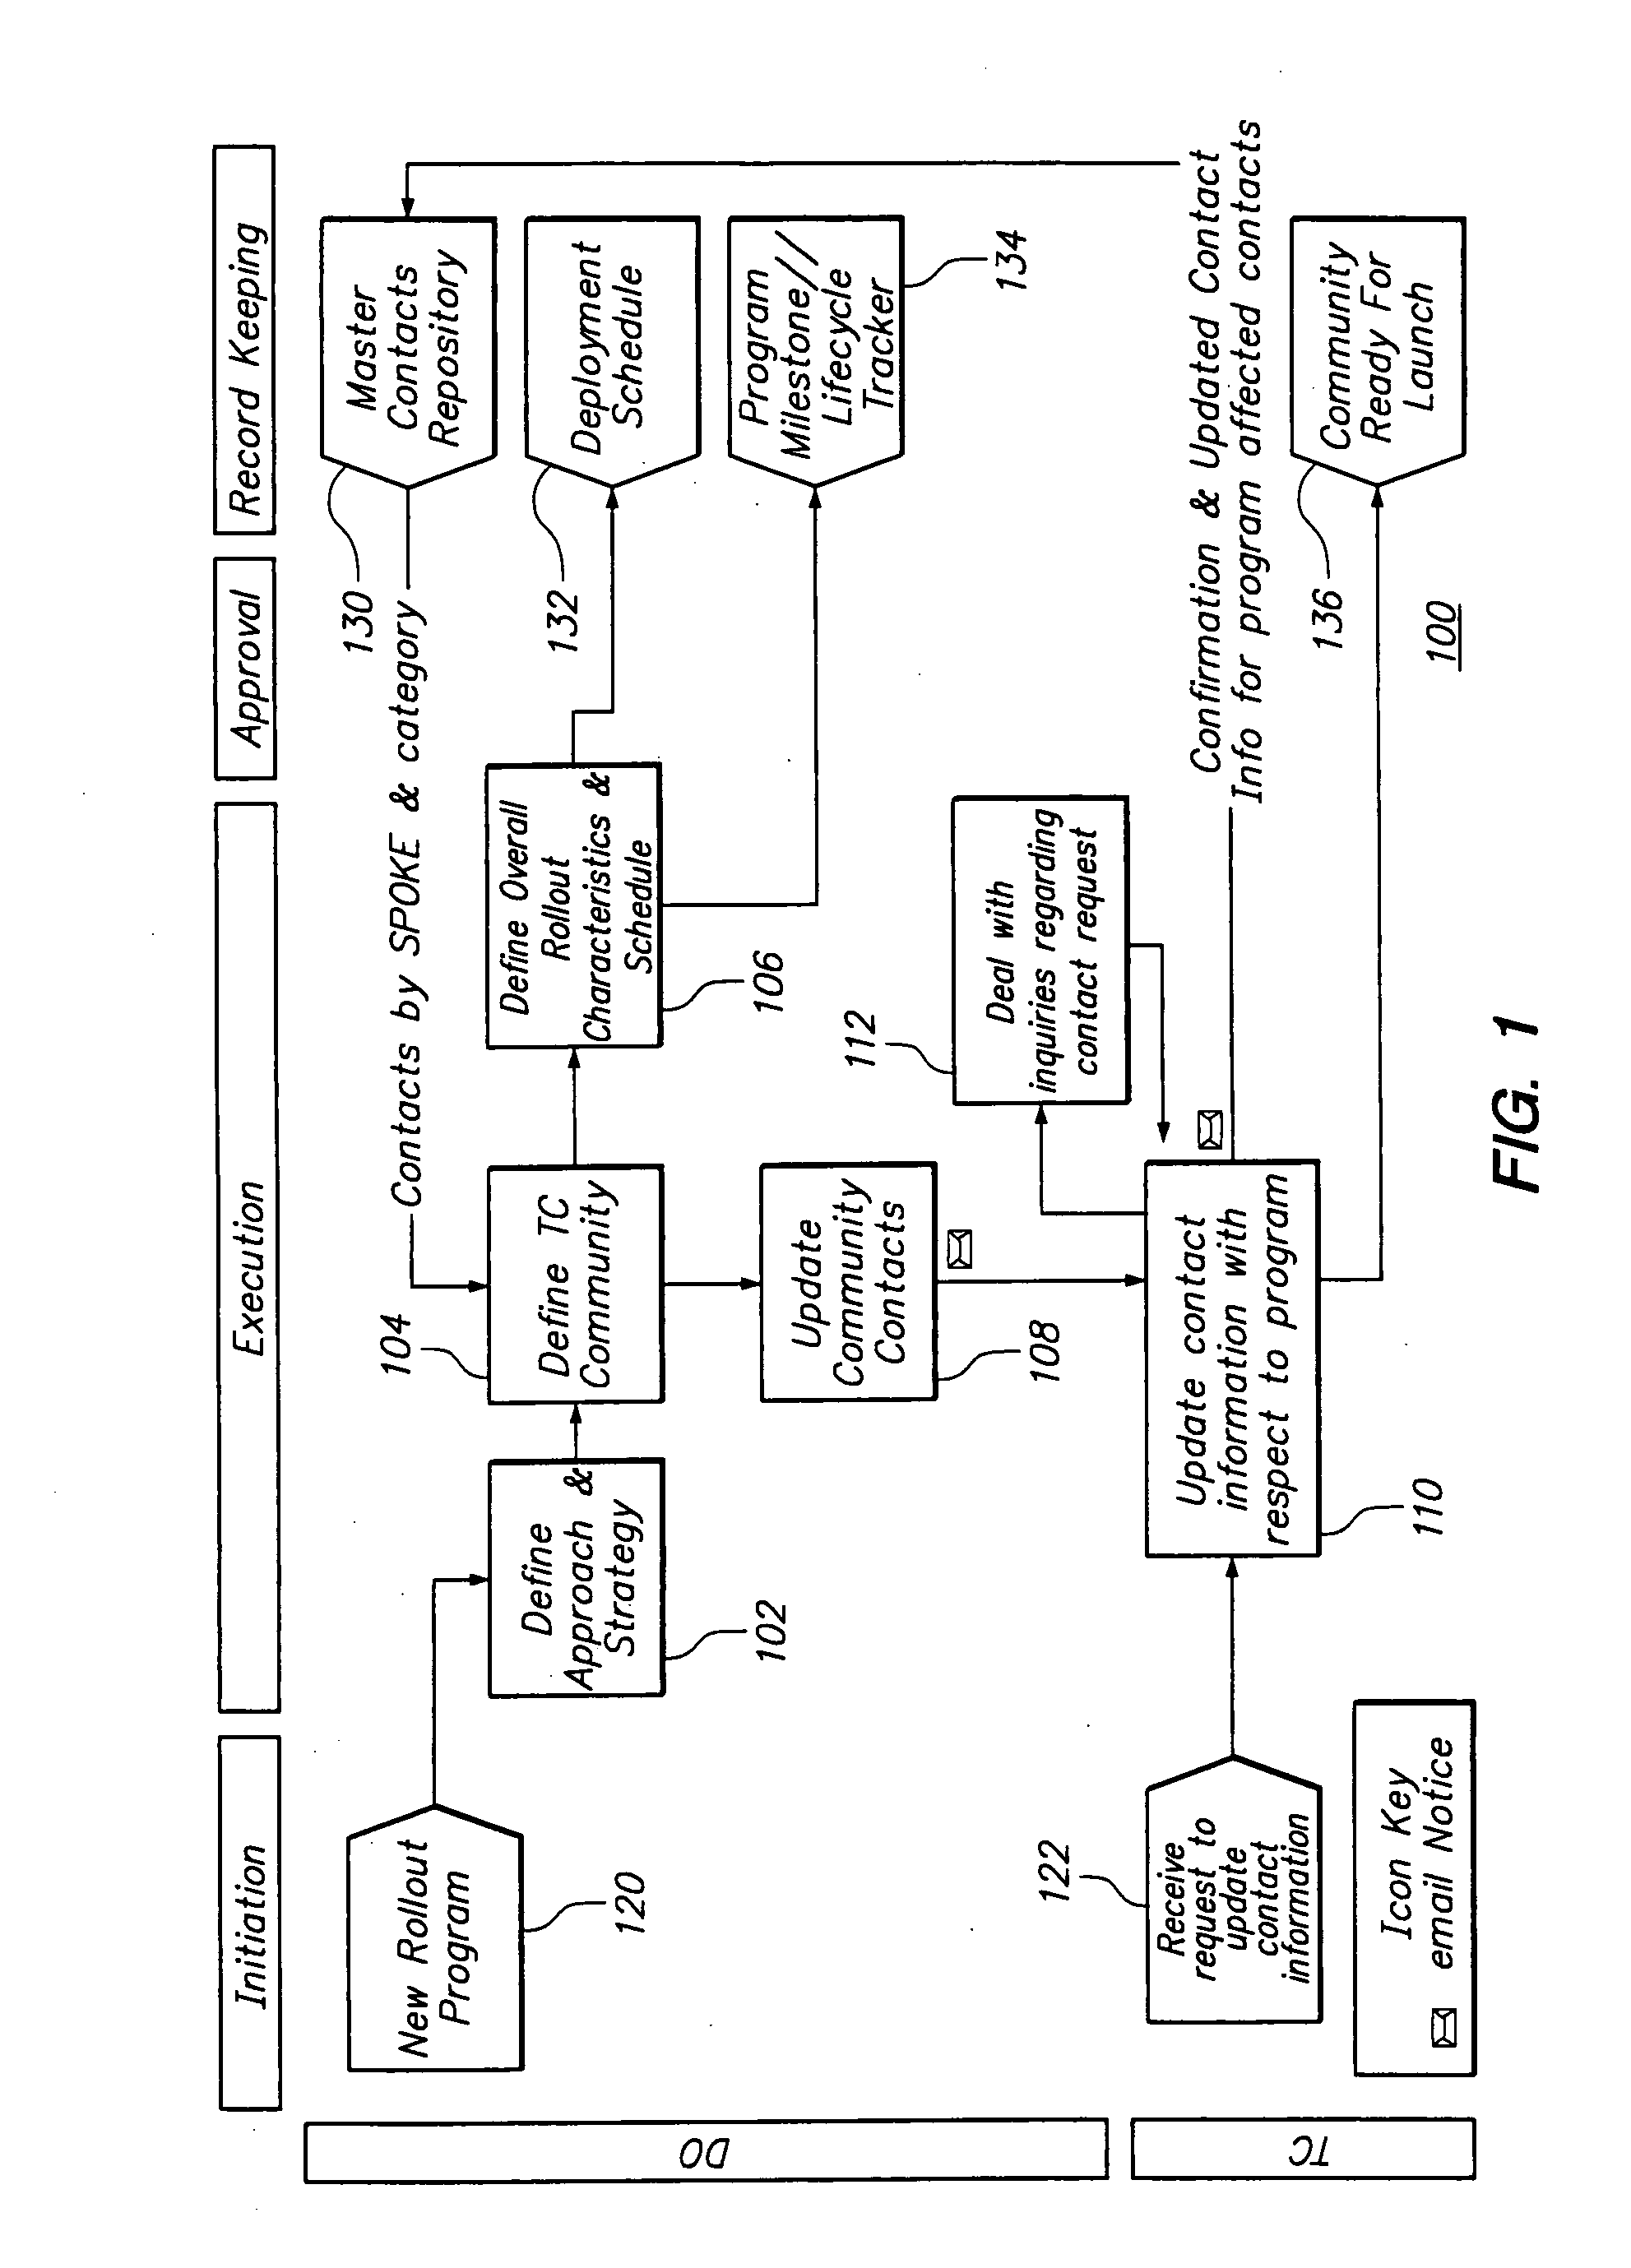 Systems, apparatus and methods for distributed deployment management